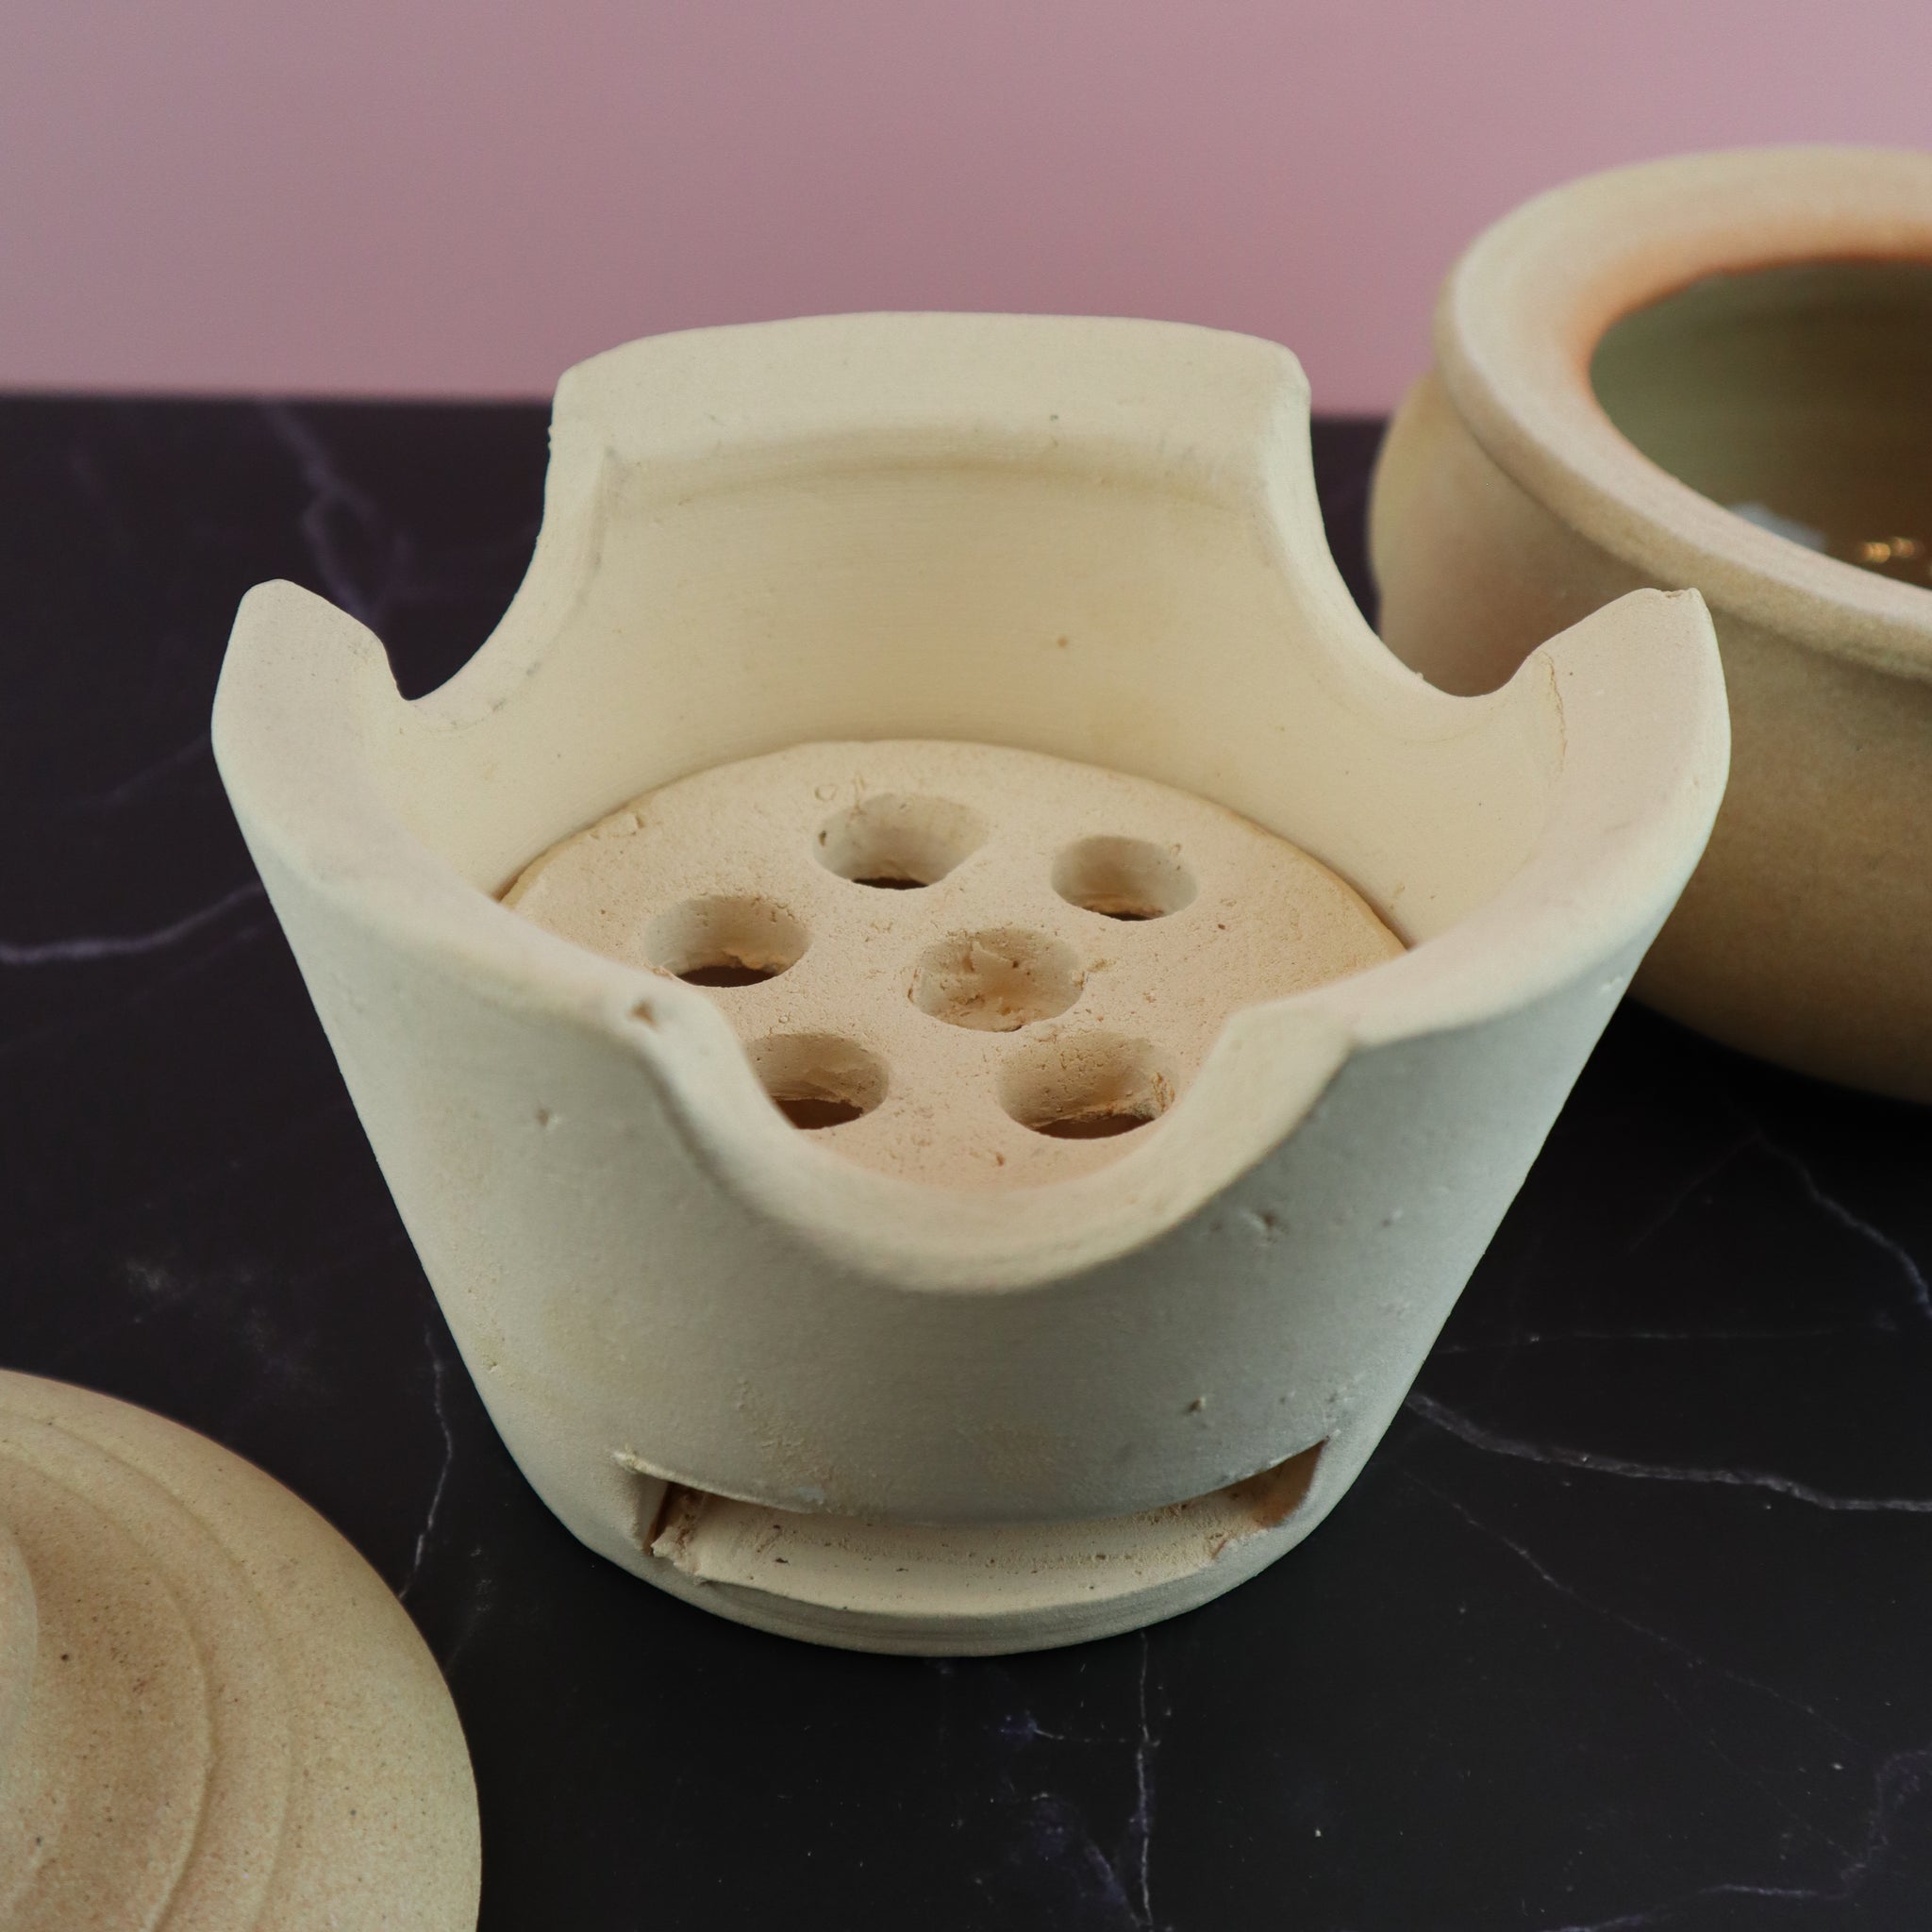 Clay Cutter – Pottery Clay Thailand